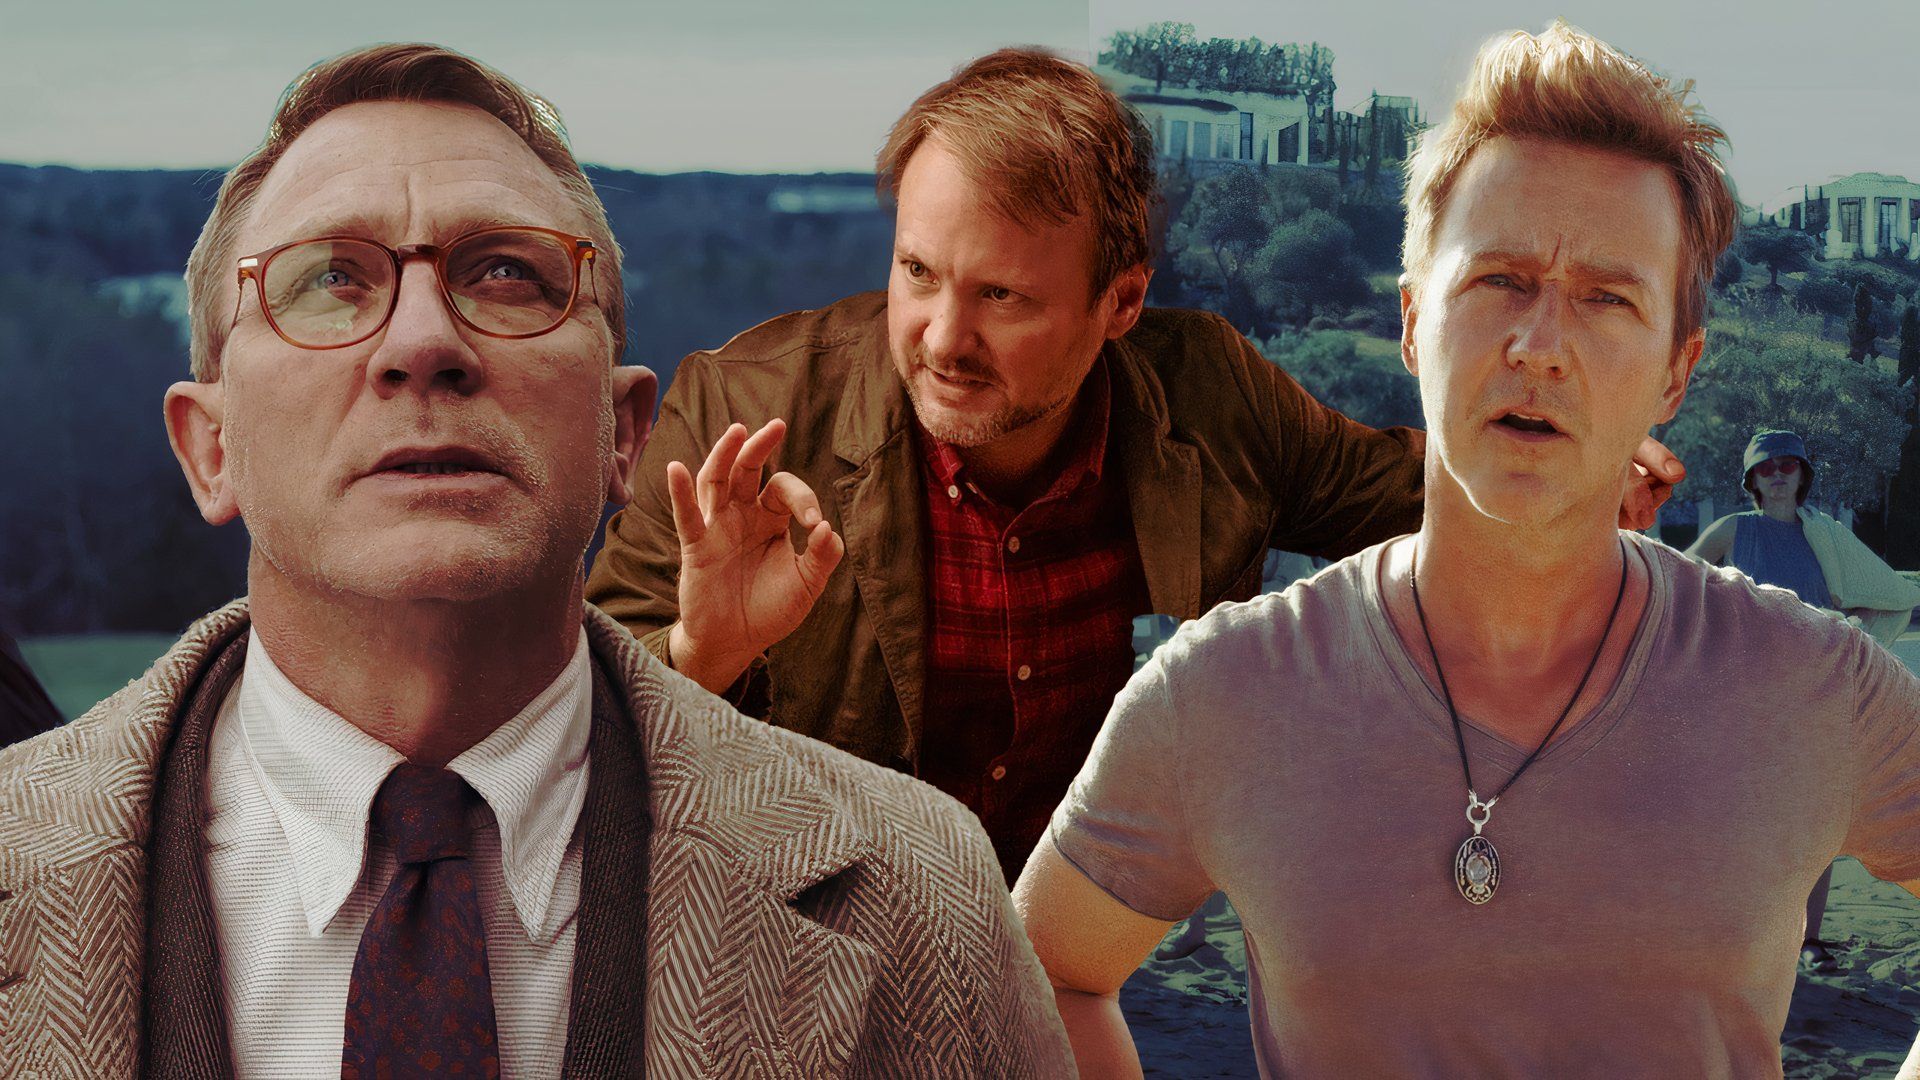 An edited image of Daniel Craig, Rian Johnson, and Edward Norton in the Knives Out Franchise